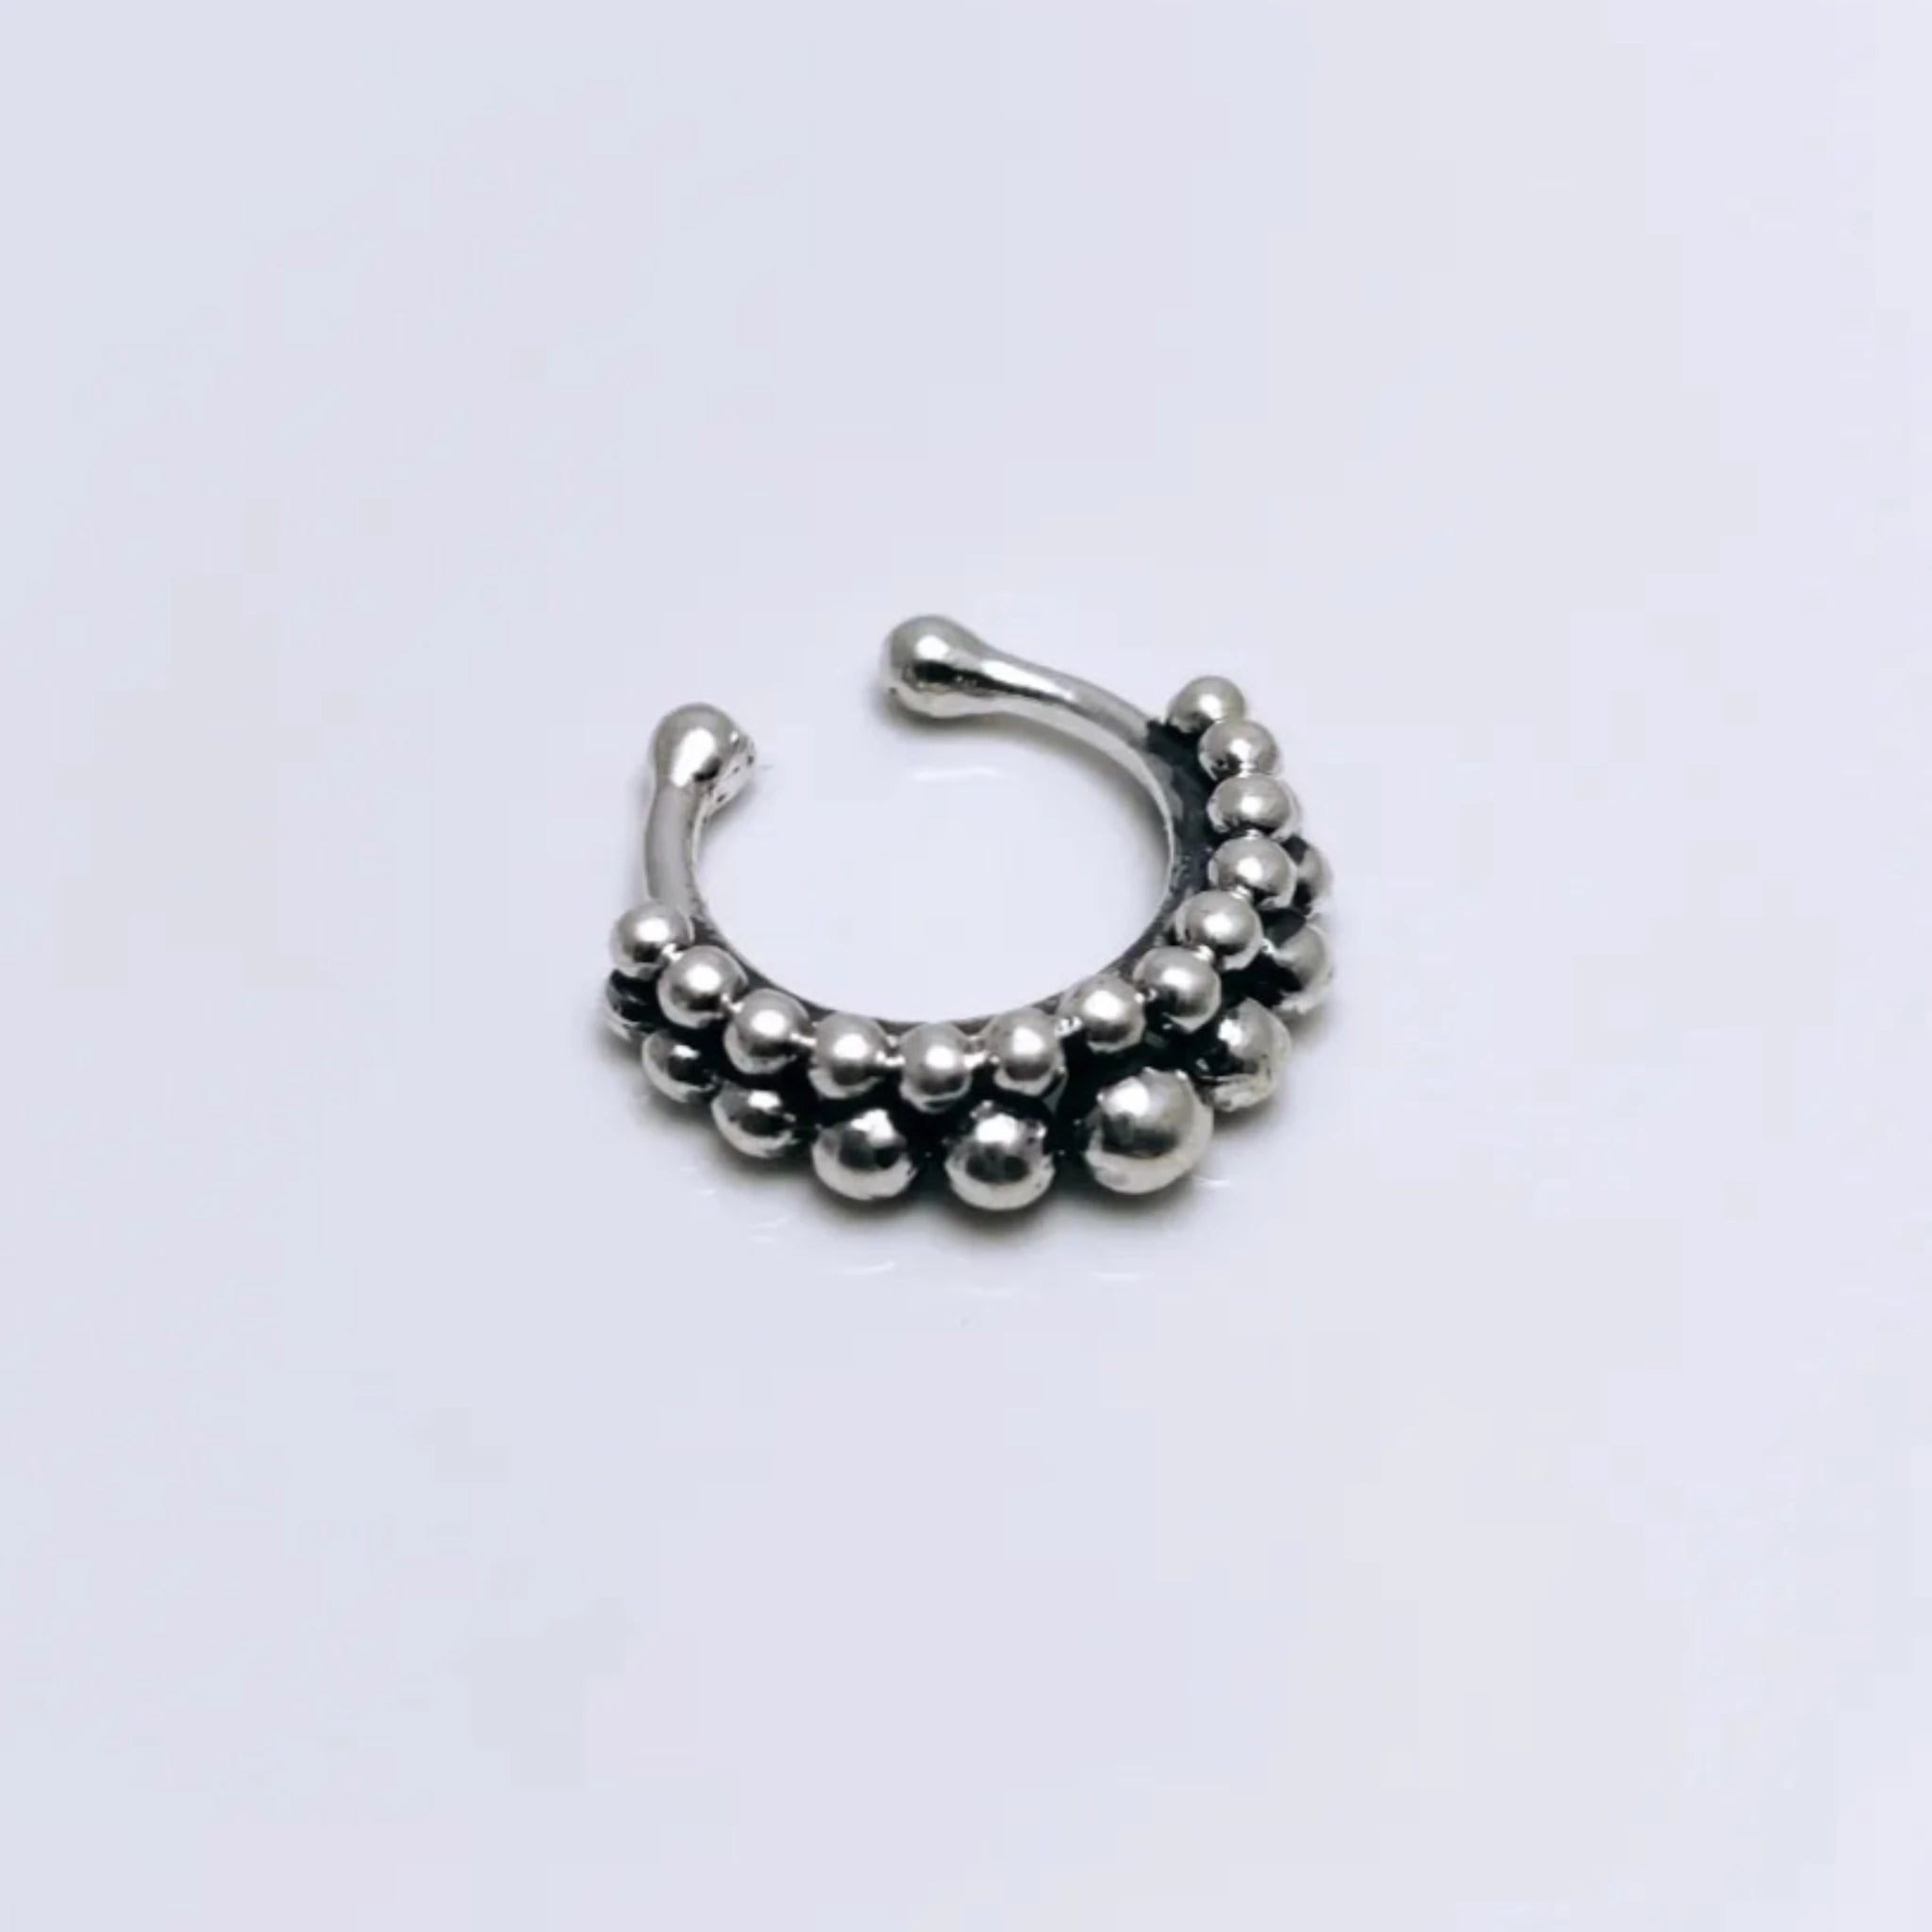 Buy VAMA FASHIONS Non Piercing NosePin Pressing Type Clip on Oxidised Black Silver  Nose Ring Stud for Girls Women at Amazon.in